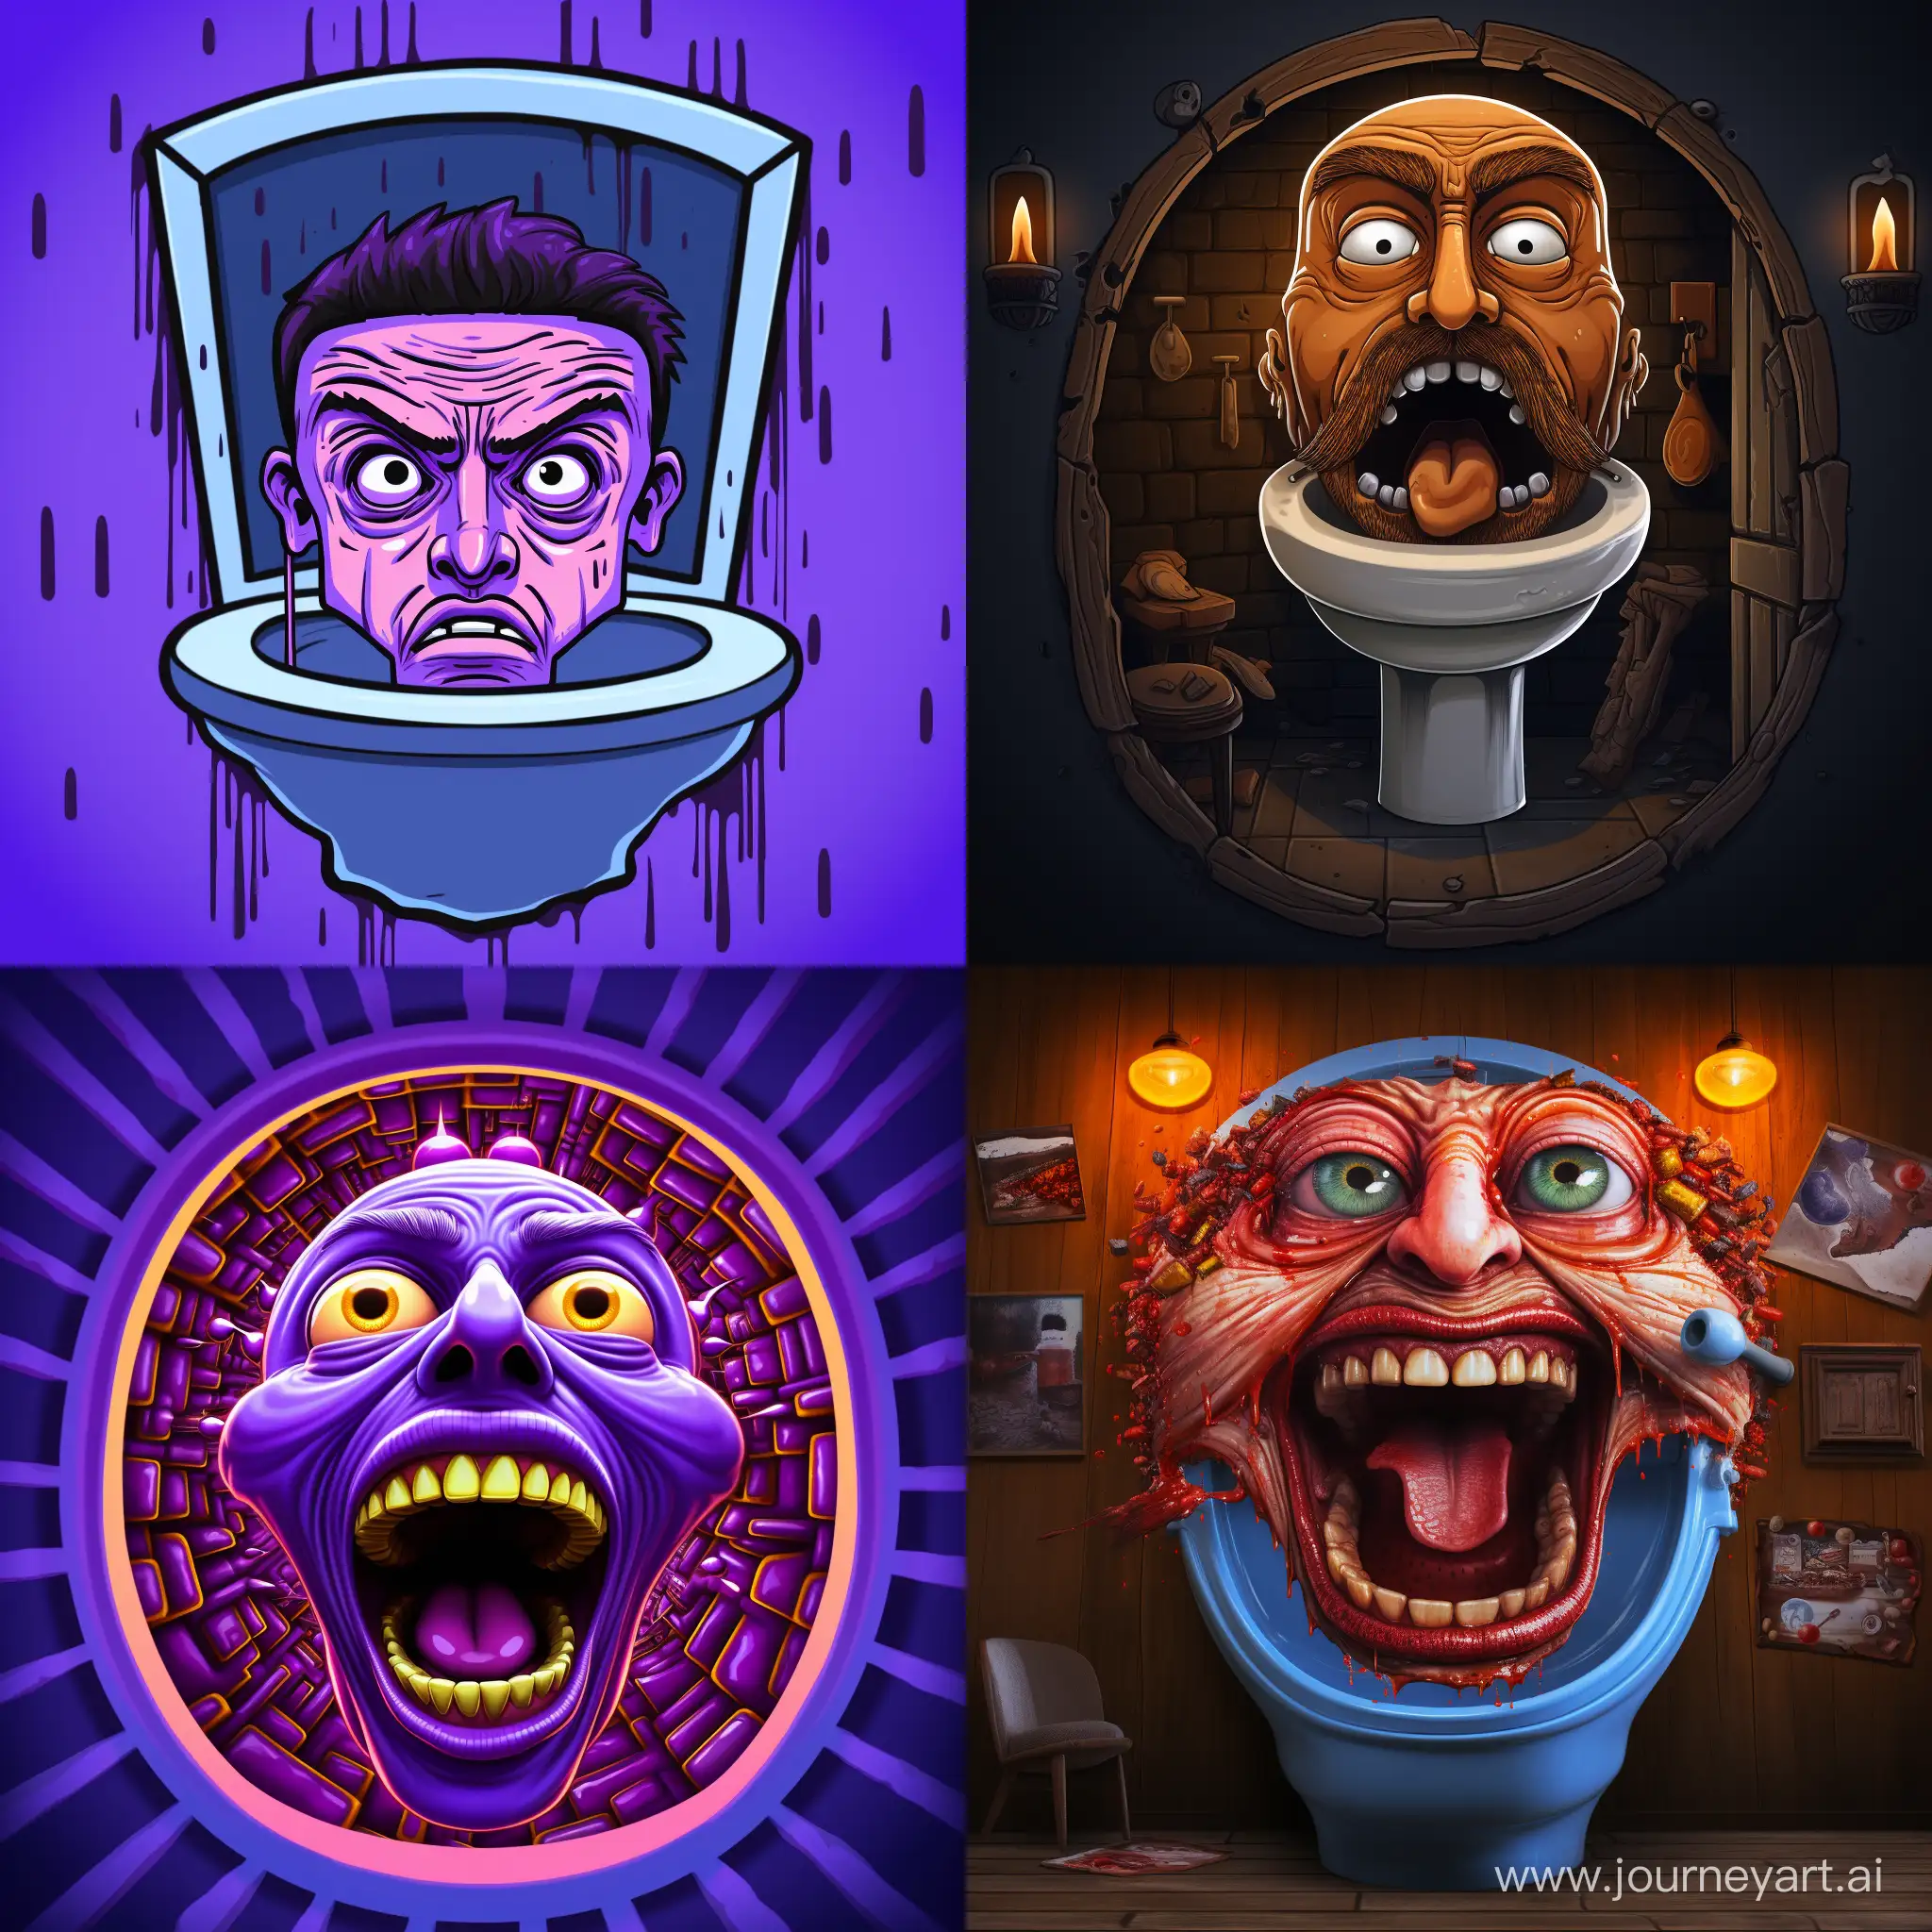 Quirky-Skibidi-Toilet-Game-Logo-with-Human-Head-Creative-and-Playful-Design